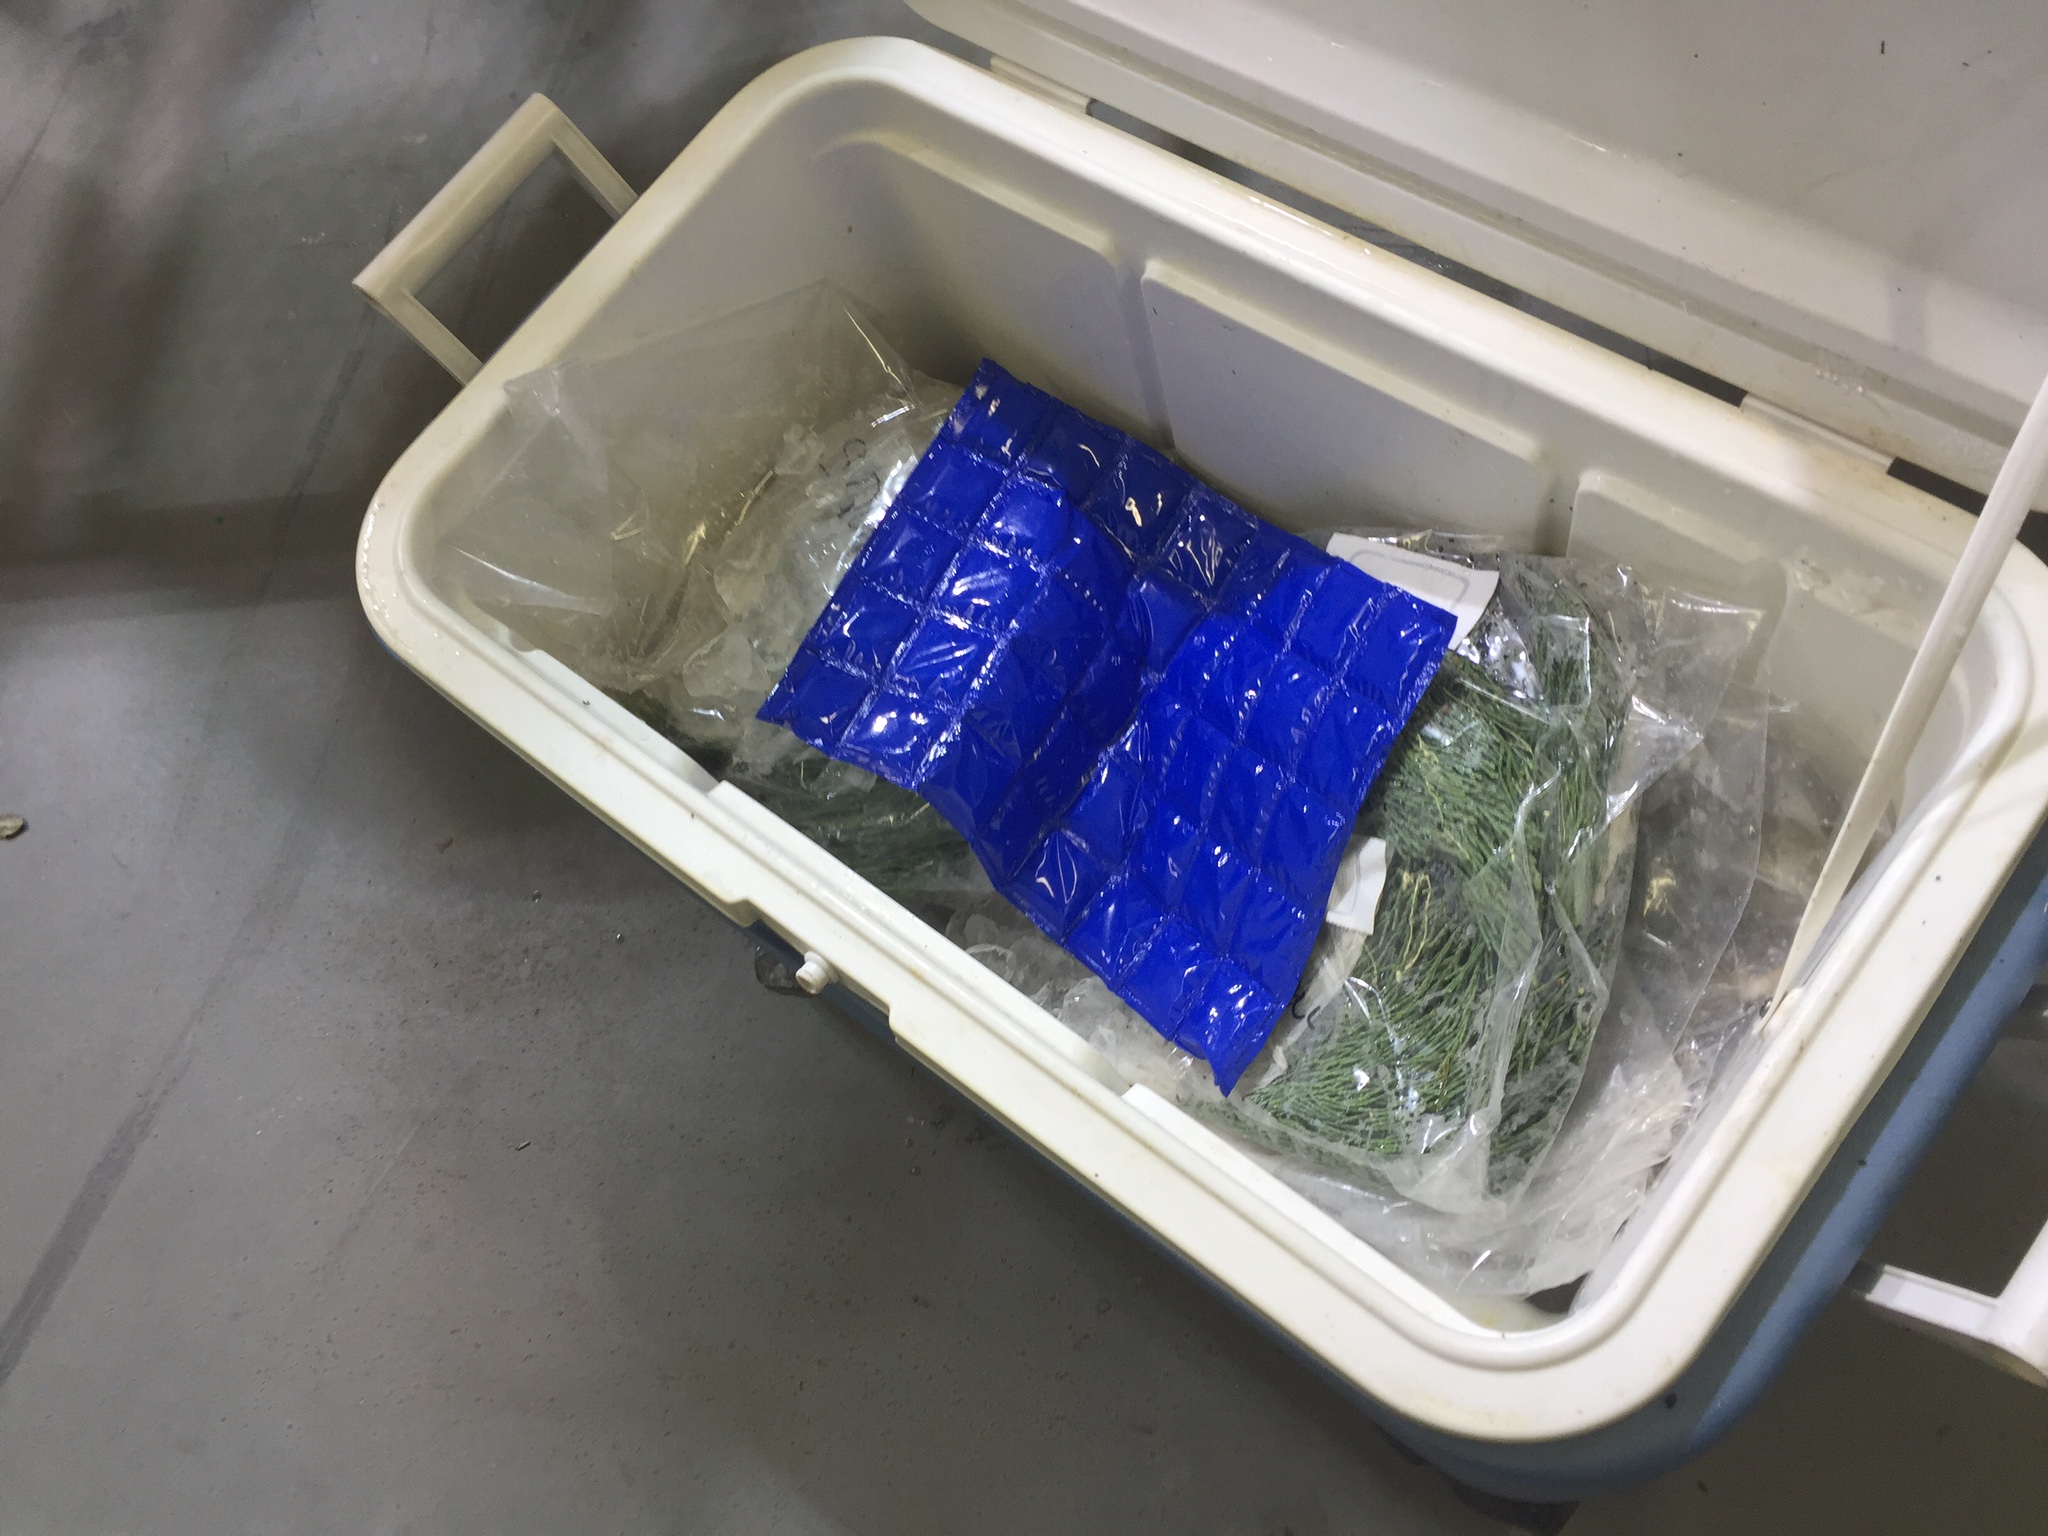 20. As soon as our plane touched down in Michigan we put all the biological material on ice and into a cooler.